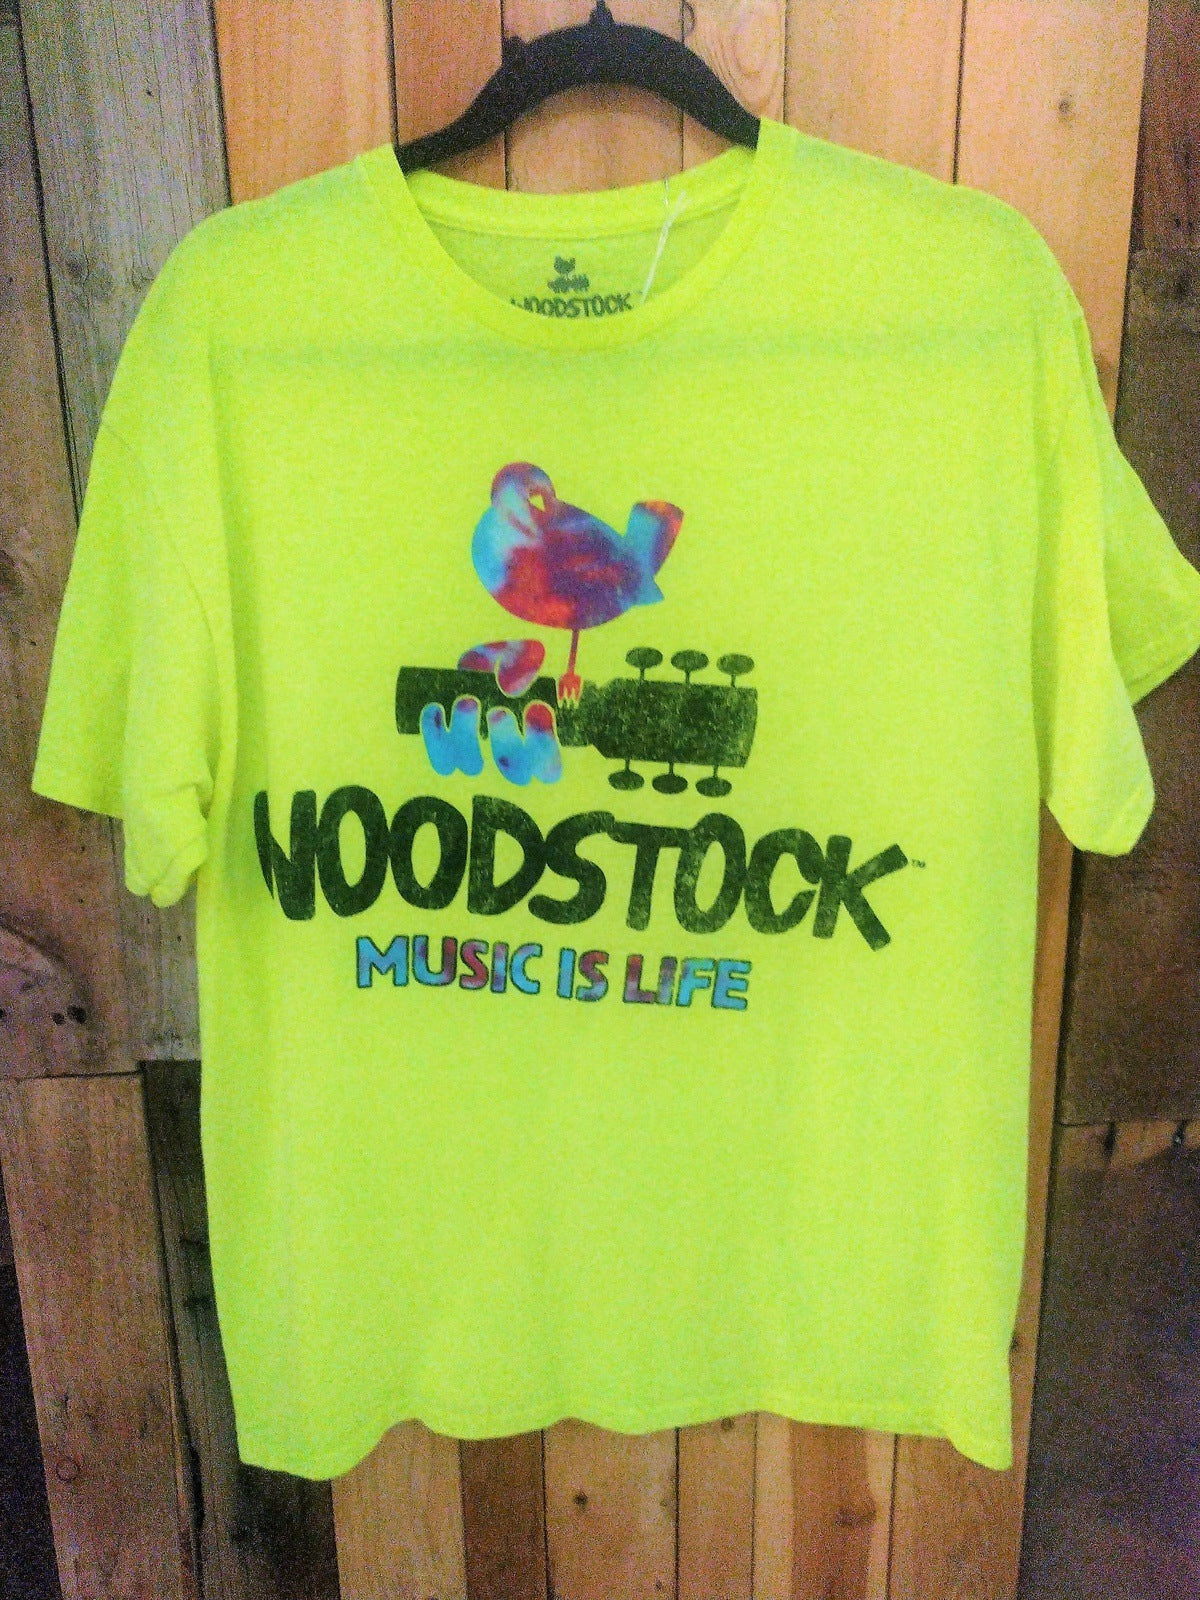 Woodstock "Music is Life" Official Merchandise T Shirt Size Large